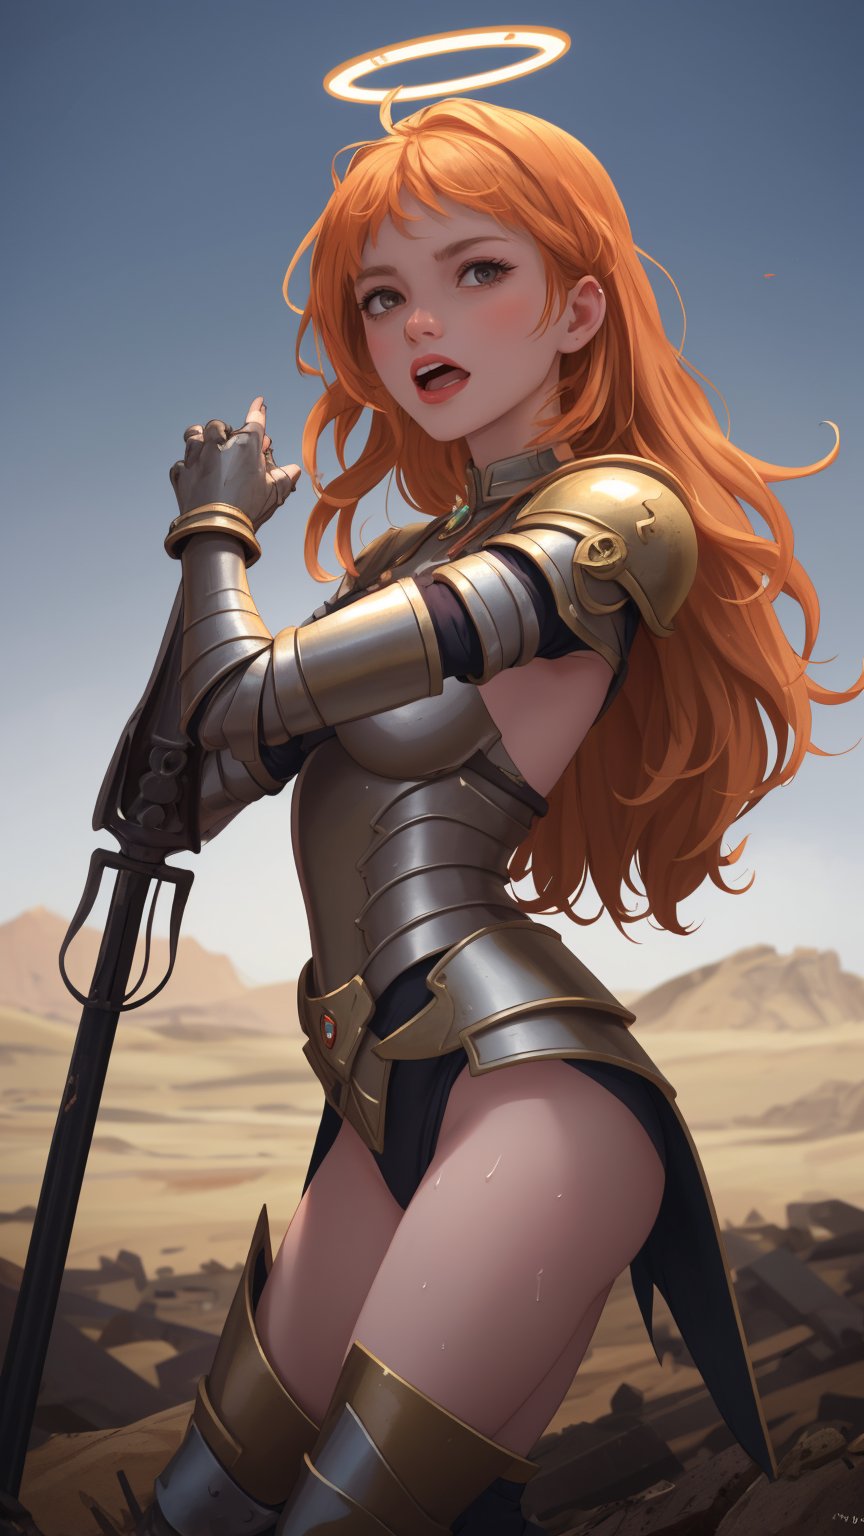 bright ginger hair A fierce warrior princess stands victorious amidst the carnage of battle-scarred terrain, her piercing cry echoing through the desolate landscape. She's surrounded by the lifeless bodies of her fallen comrades, their armor and weapons scattered about like a grisly halo. The princess's face contorts in rage as she surveys the devastating aftermath, her golden hair tangled with sweat and tears.,disgusted face